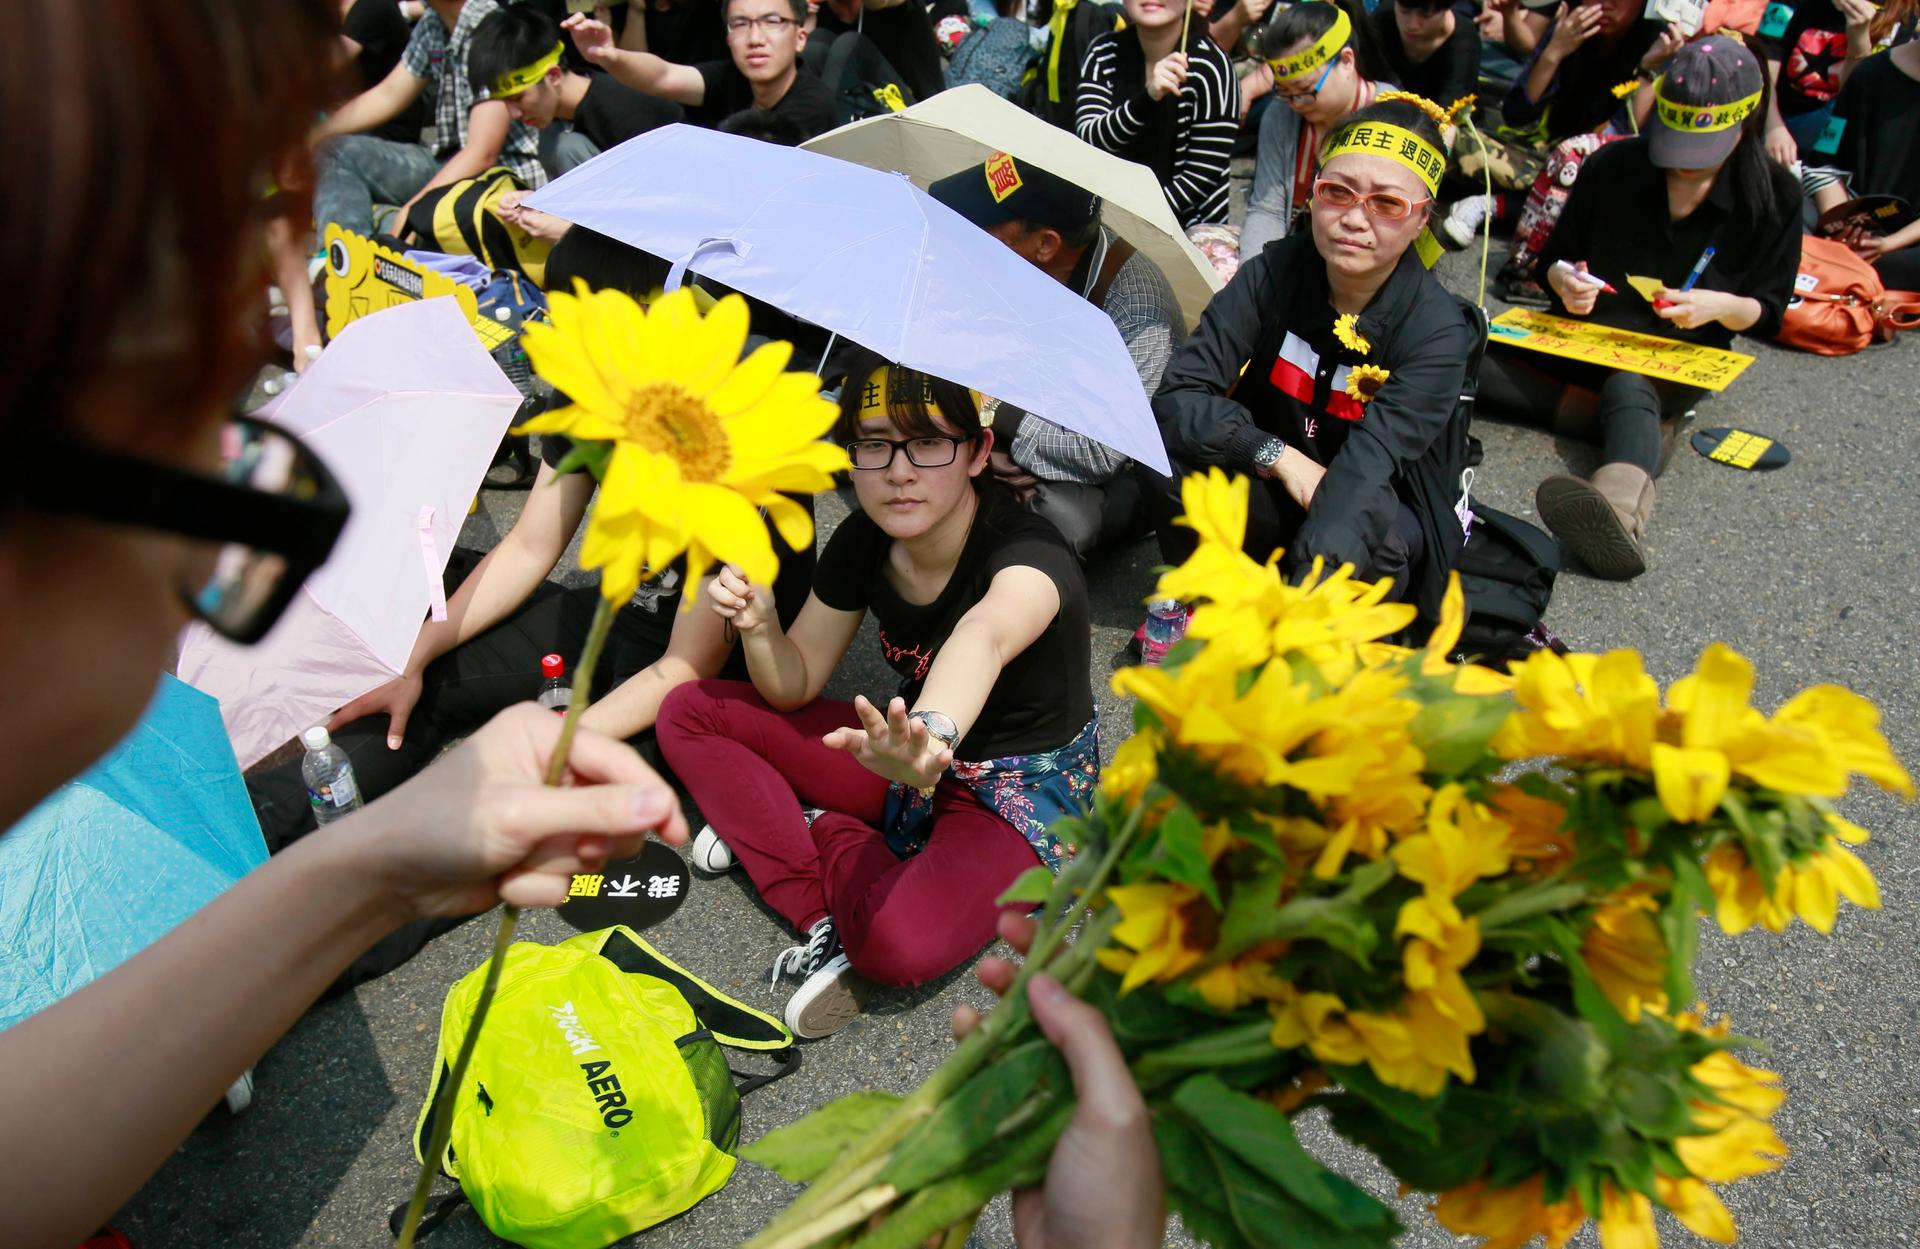 Protesters distribute sunflowers during a massive protest denouncing the controversial China Taiwan trade pact in front of the Presidential Building in Taipei, Taiwan, Sunday, March 30, 2014.